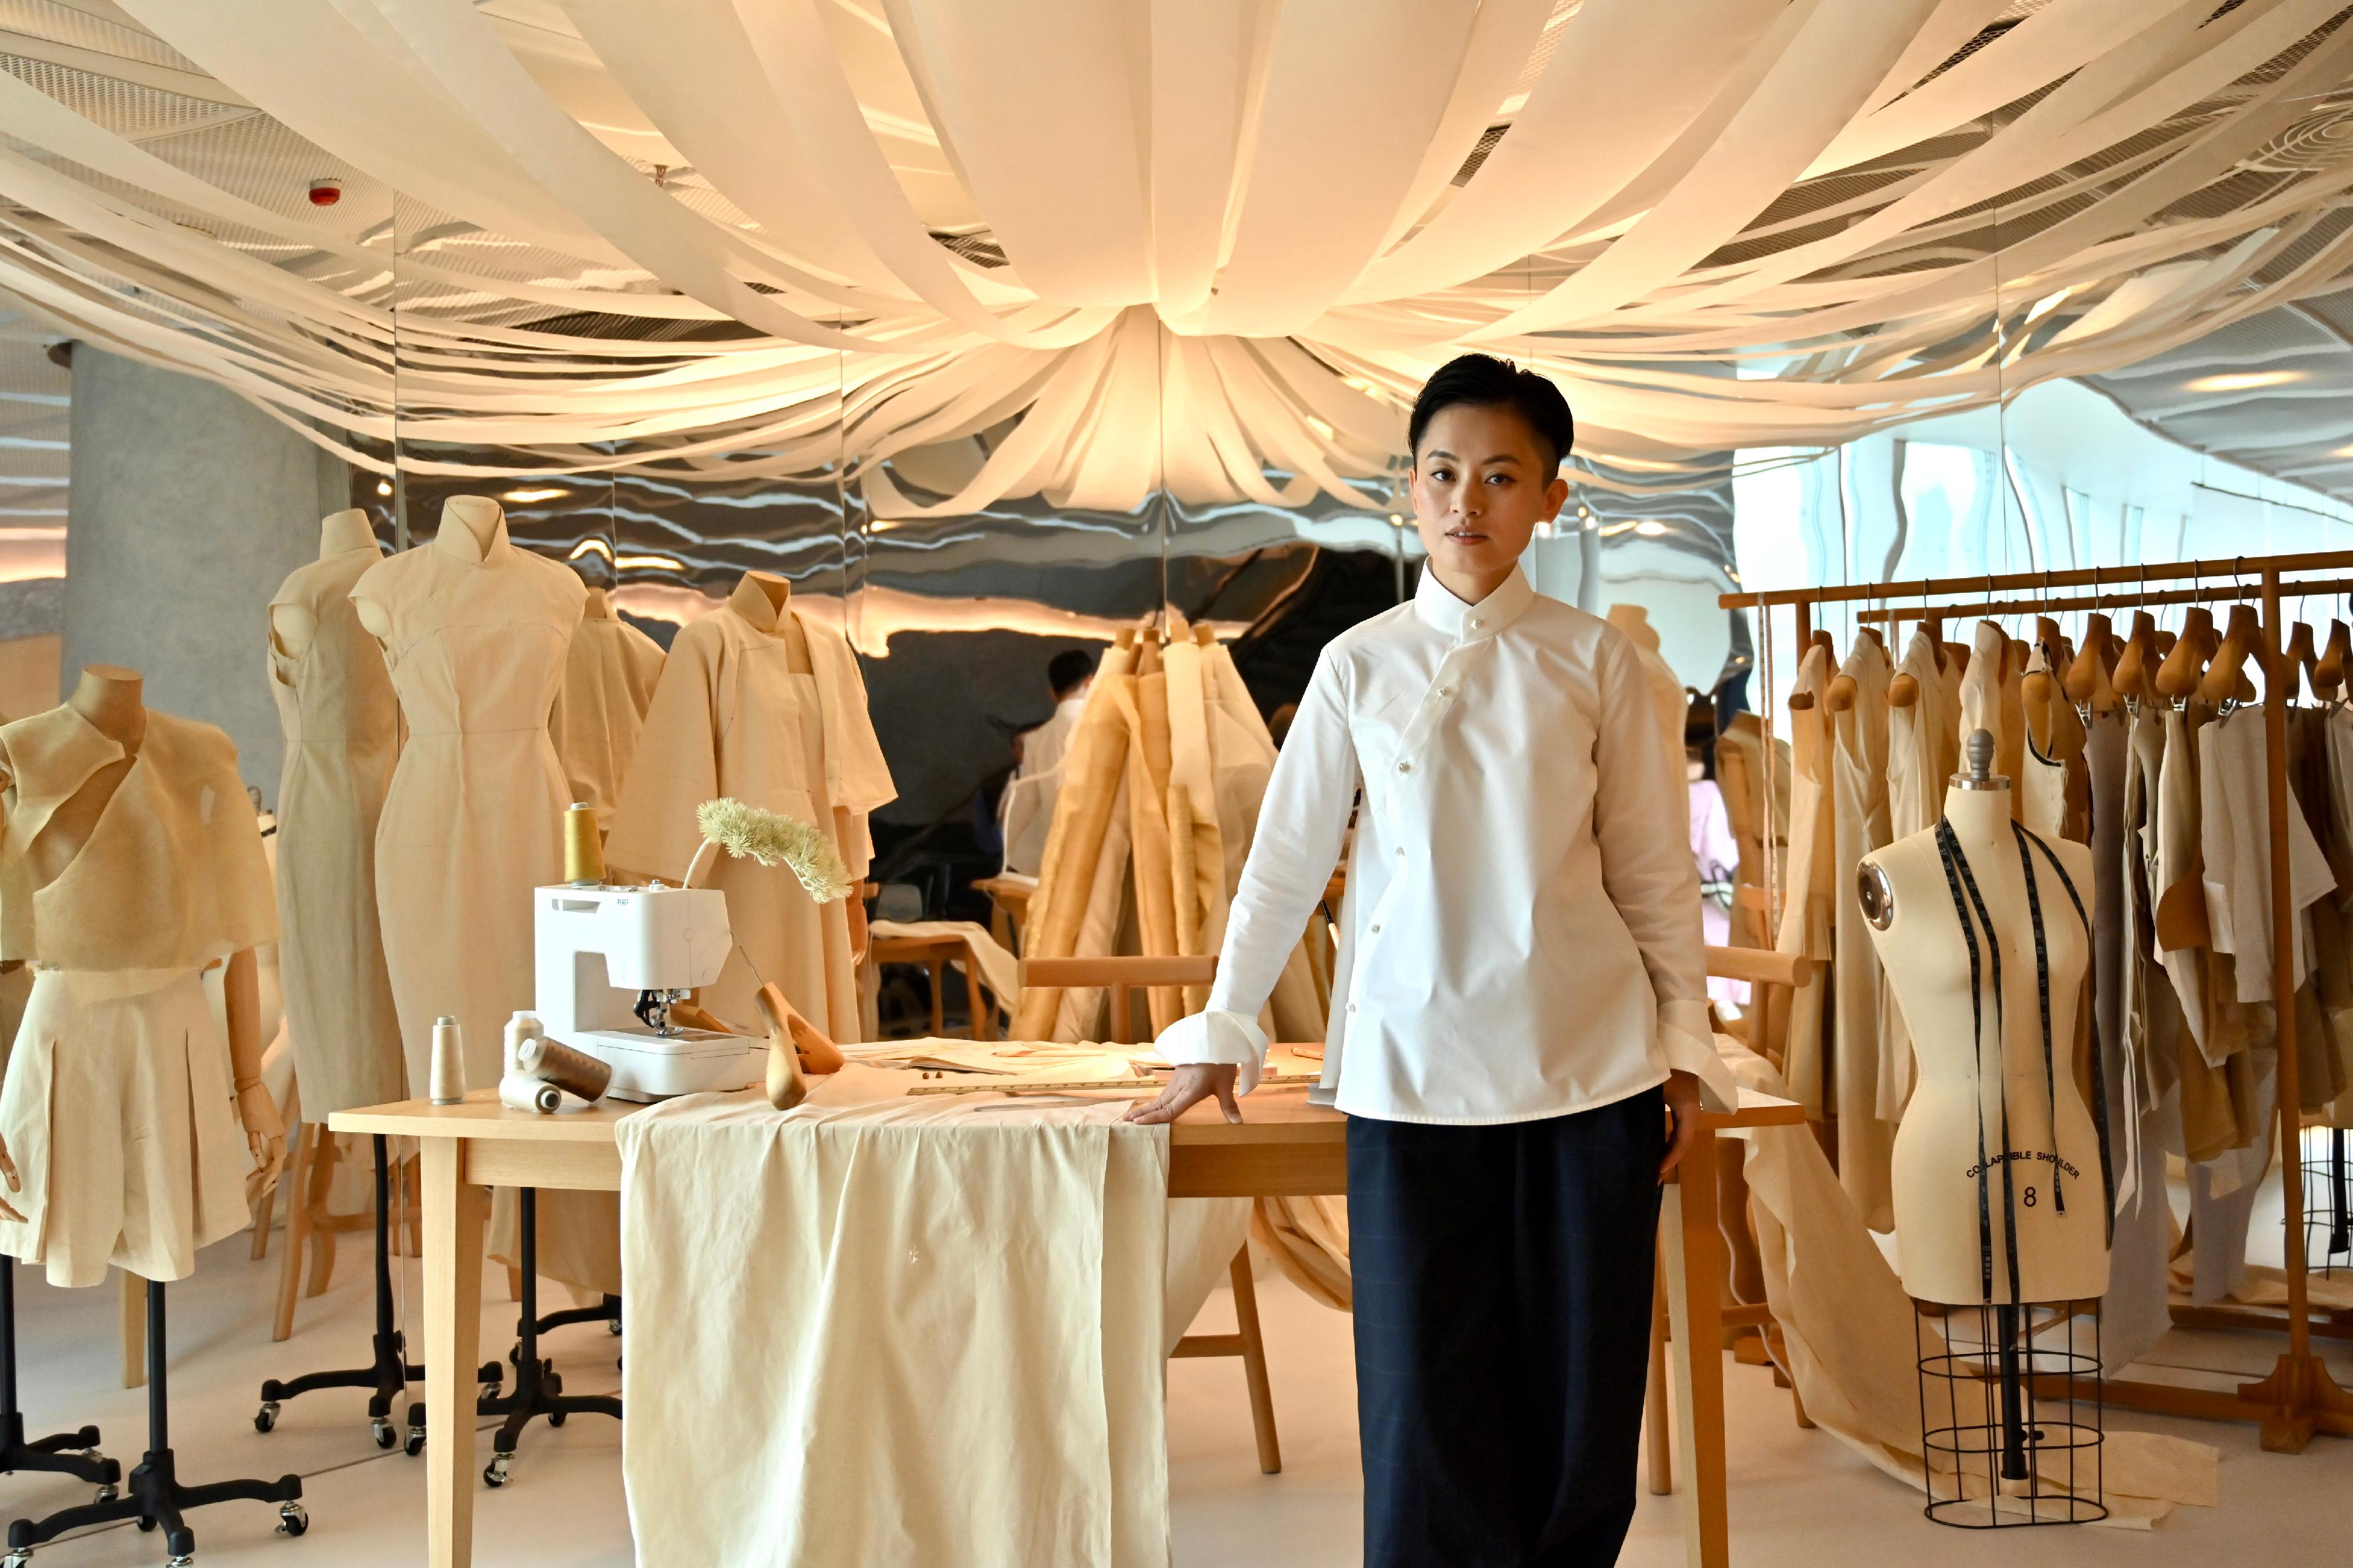 The opening ceremony of the Hong Kong stop of the touring exhibition "A Tale of Three Cities: Guangdong-Hong Kong-Macao Greater Bay Area and Export of Silk Products in the Ming and Qing Dynasties" was held today (September 7) at the Hong Kong Museum of Art. Picture shows Hong Kong artist Janko Lam and her site-specific art installation "Those Days - Out There", which is a studio that invites visitors to travel through the past, present and future from a fashion designer's perspective and showcases new fashion pieces to recreate the classics.